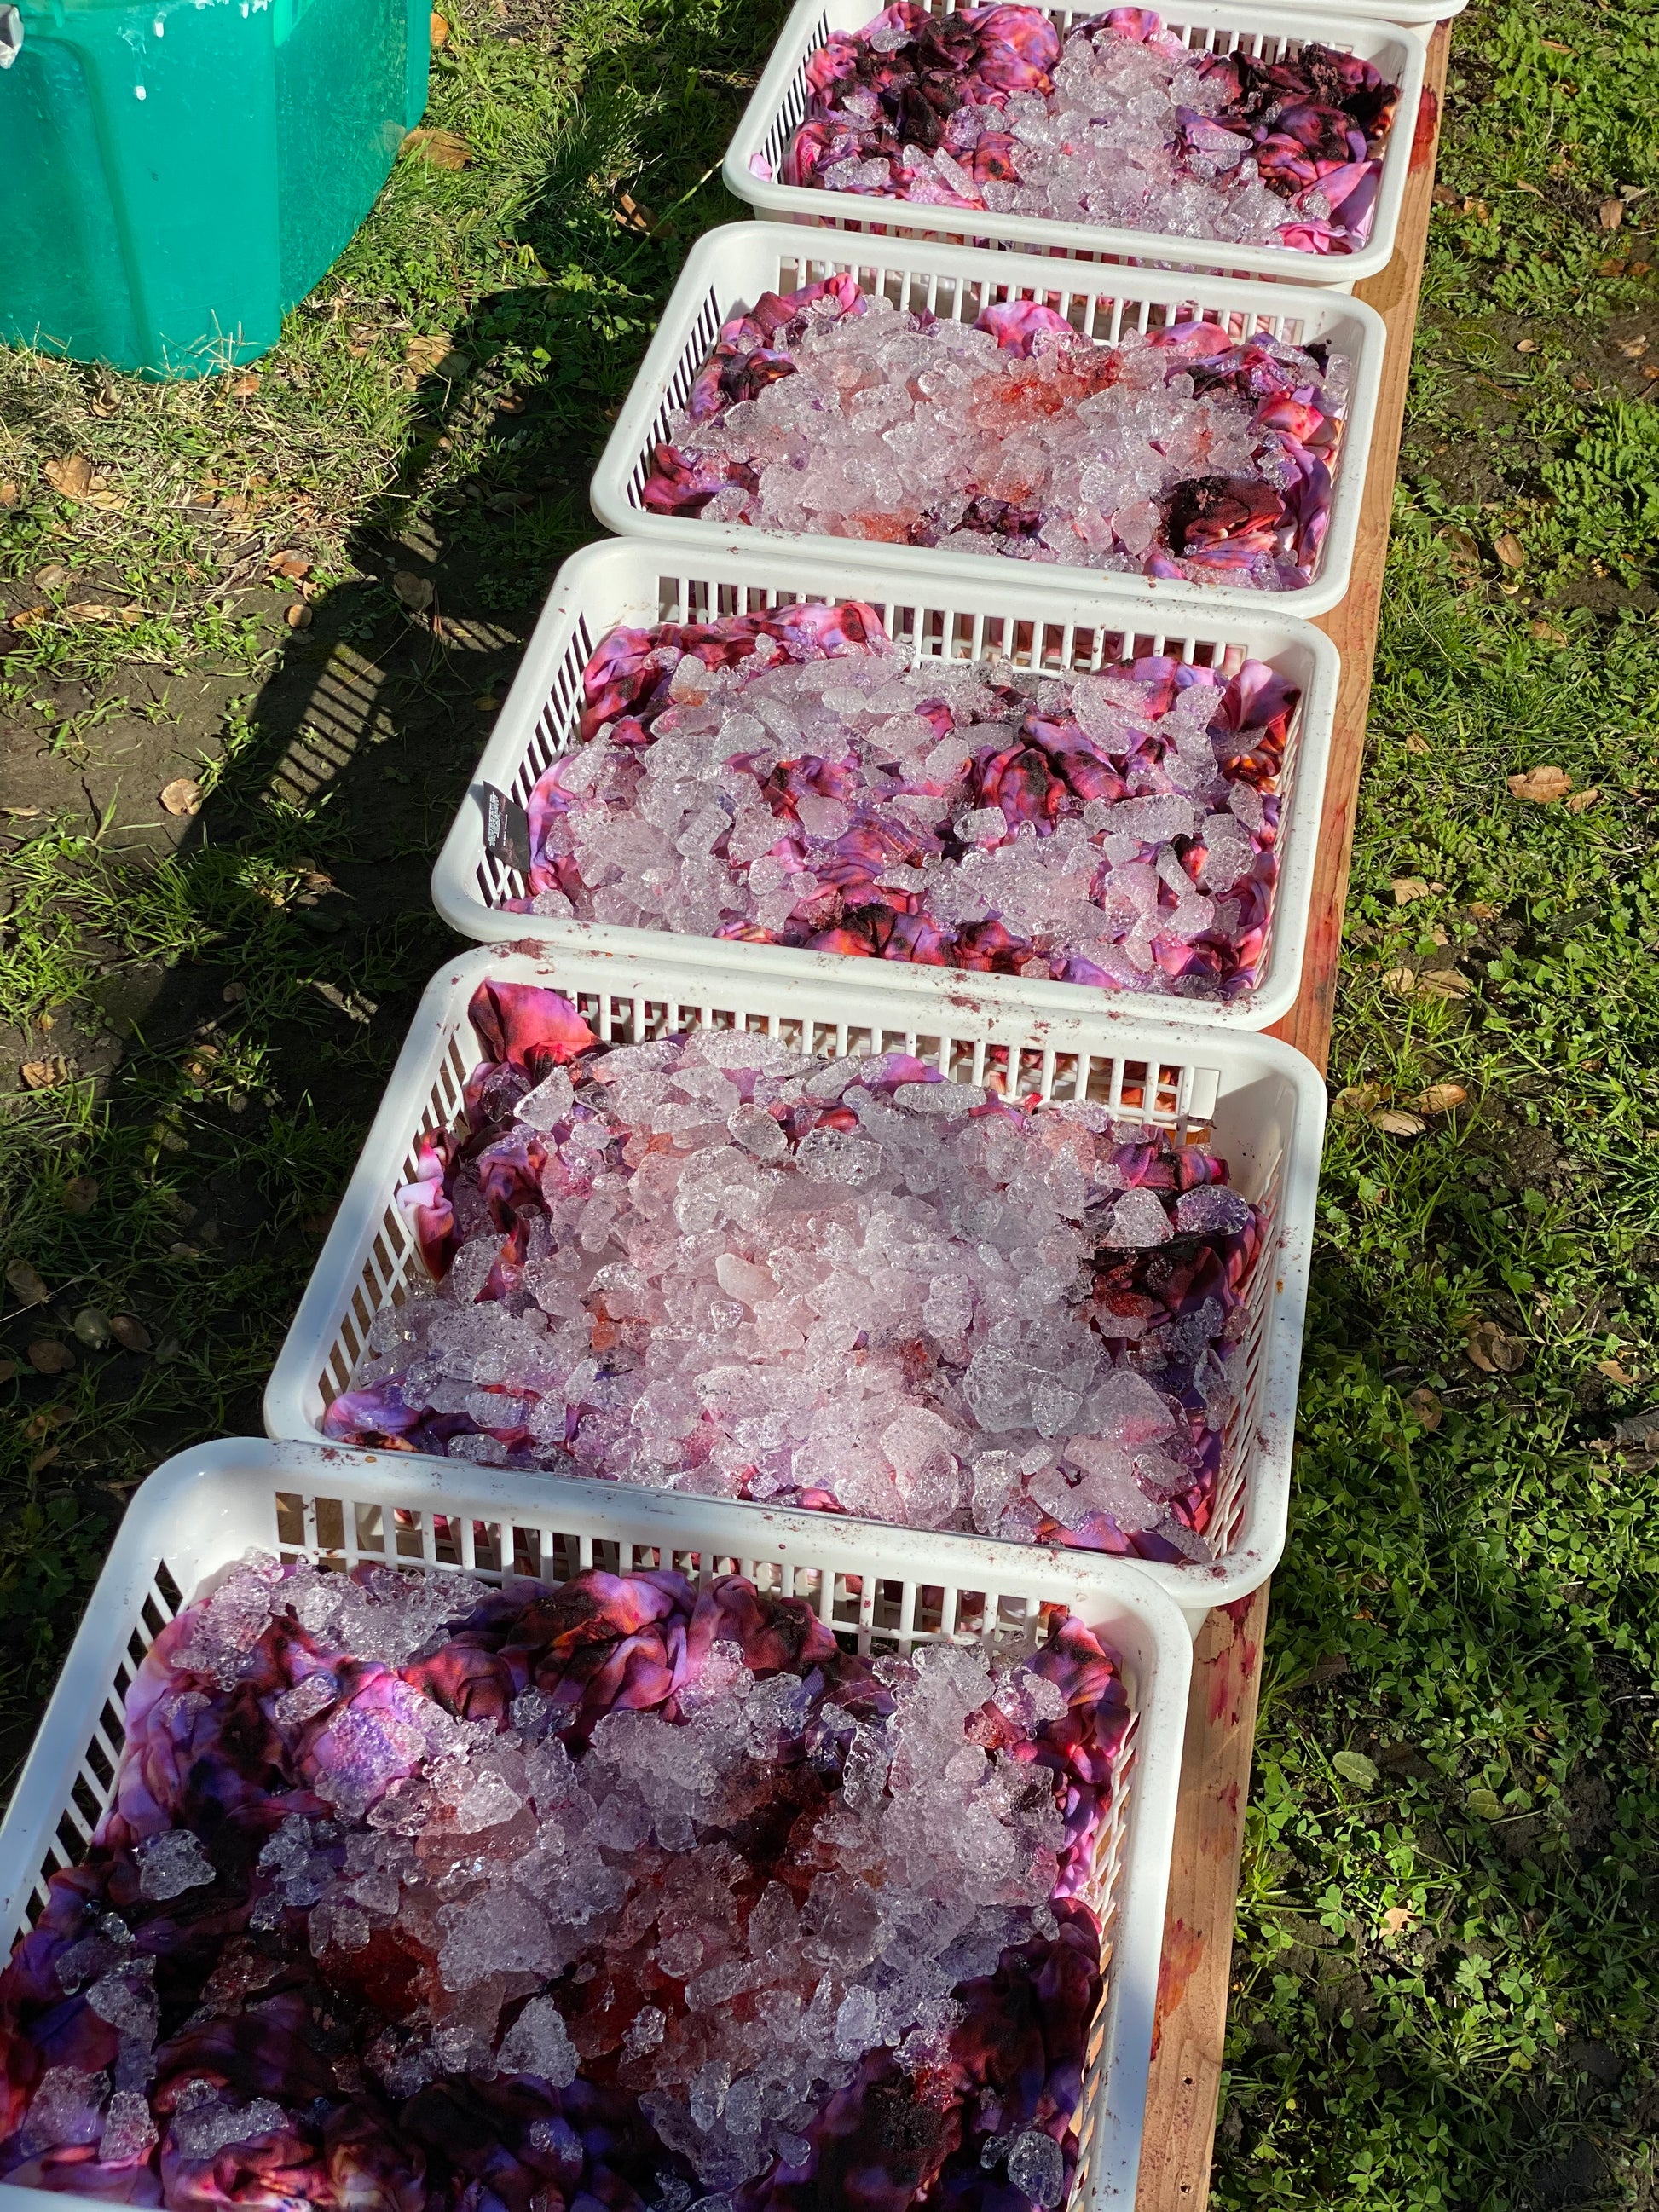 Trays filled with ice and fabric showing dye process for sweatshirts.